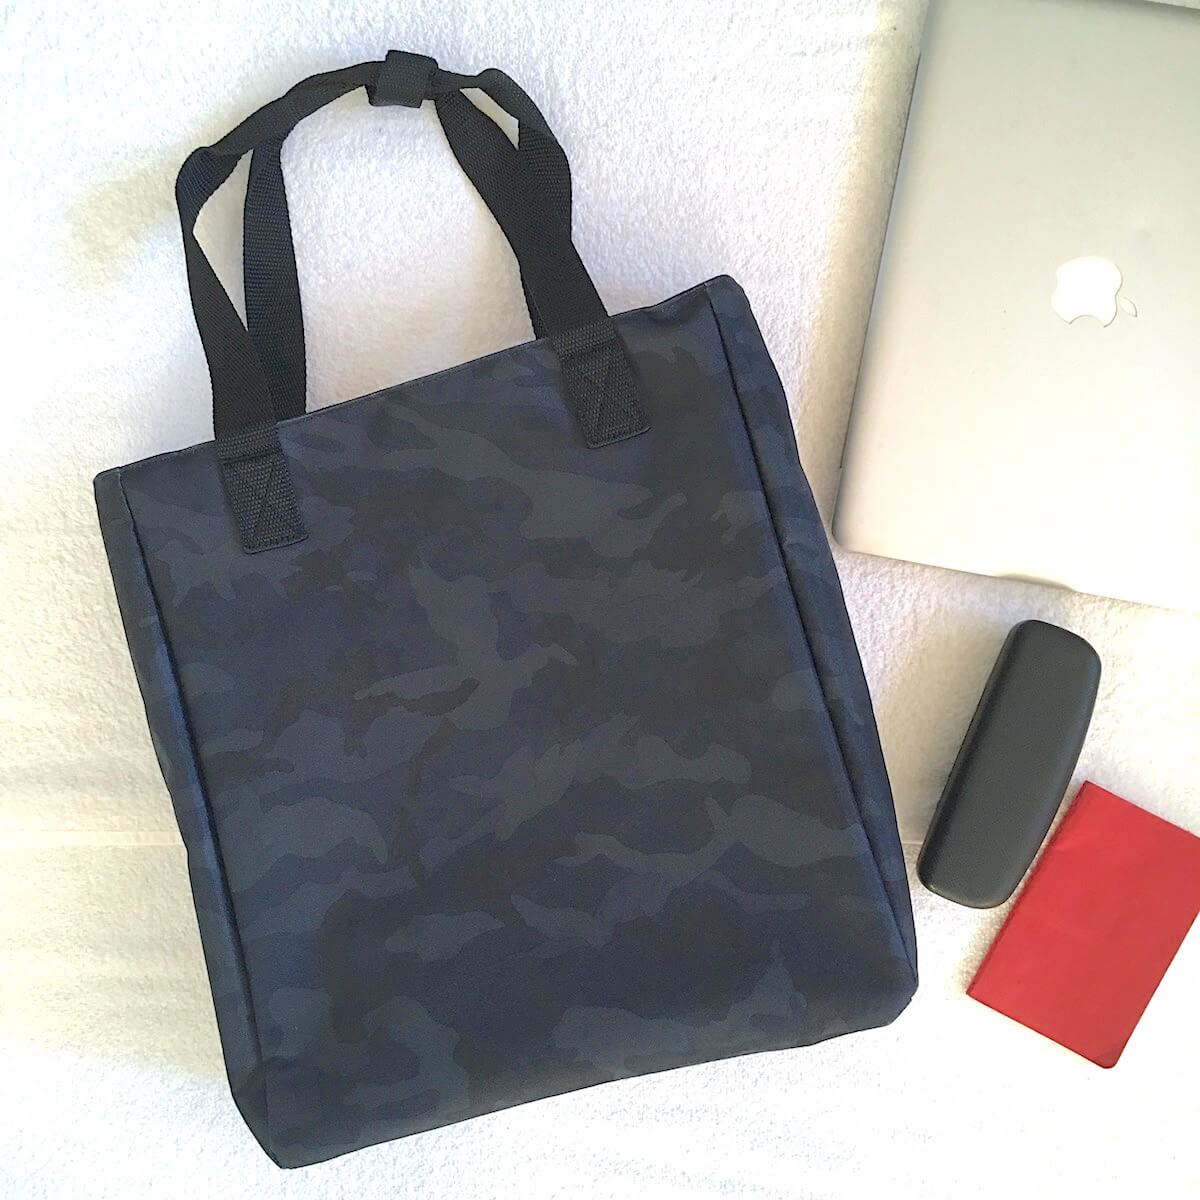 lo & sons edgemont convertible backpack tote review: a flat lay of the bag with a laptop, sunglasses case, and notebook.